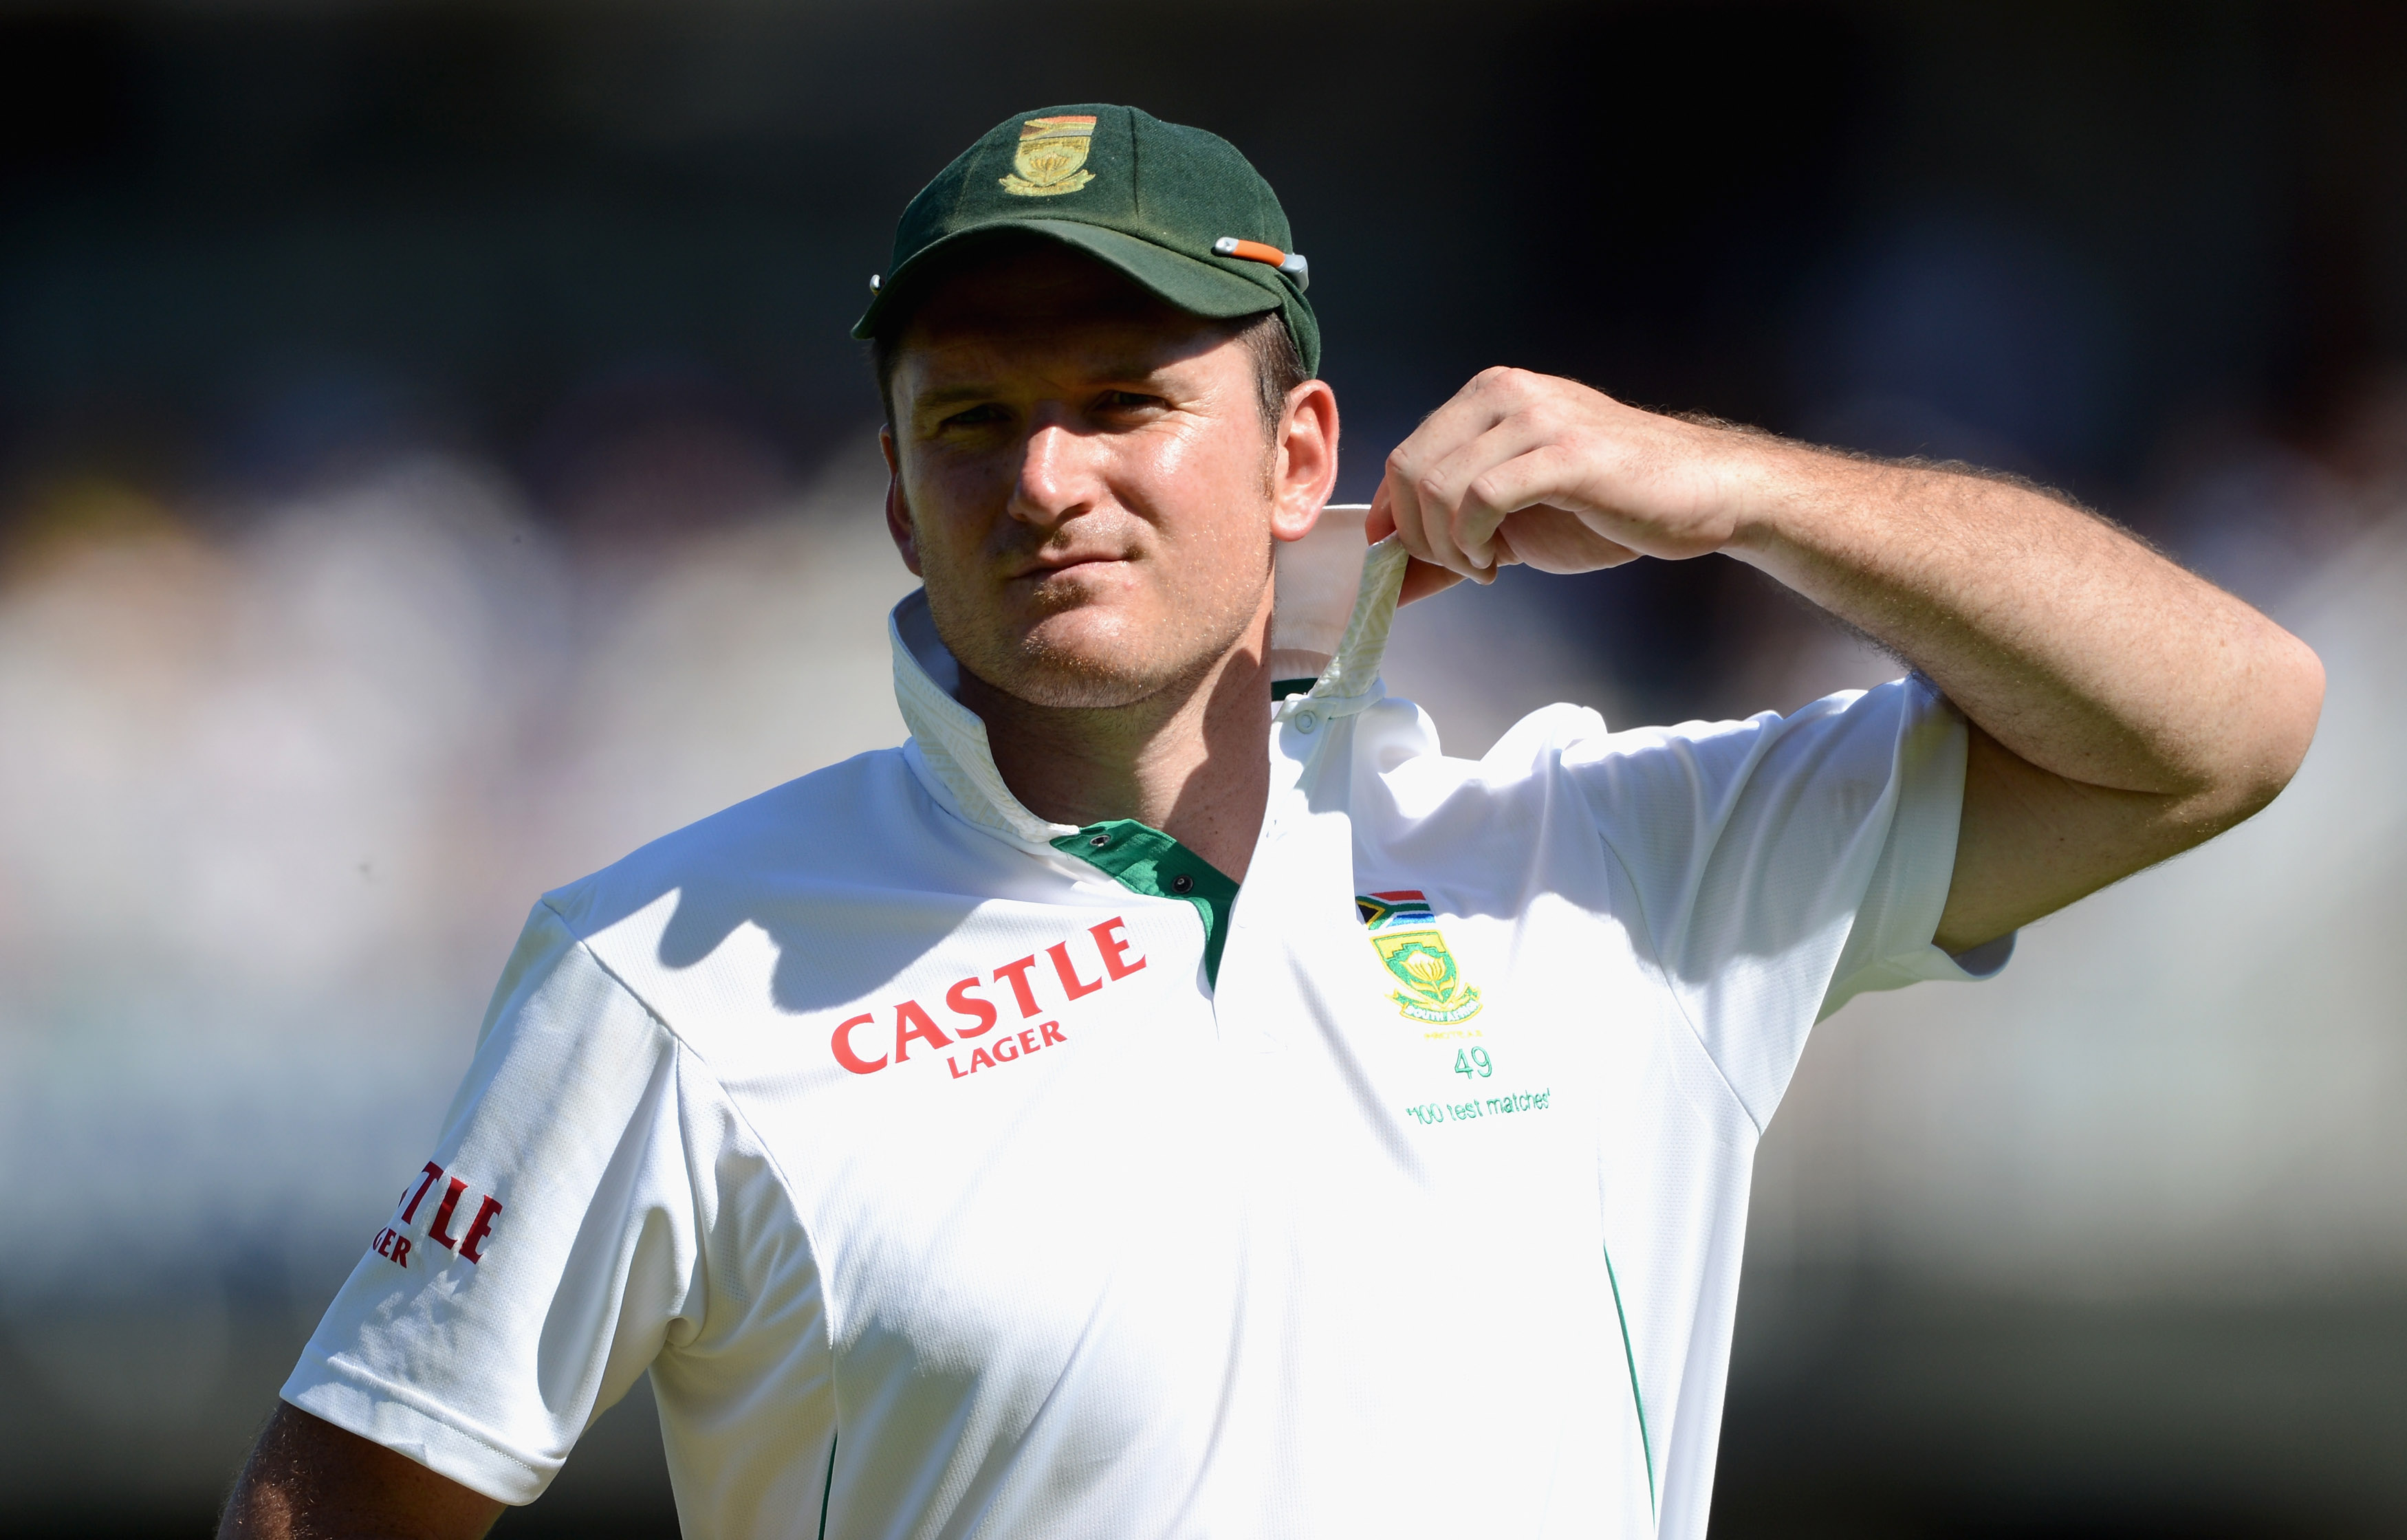 Graeme Smith takes a jab at Johnson on Twitter after South Africa humiliate Australia